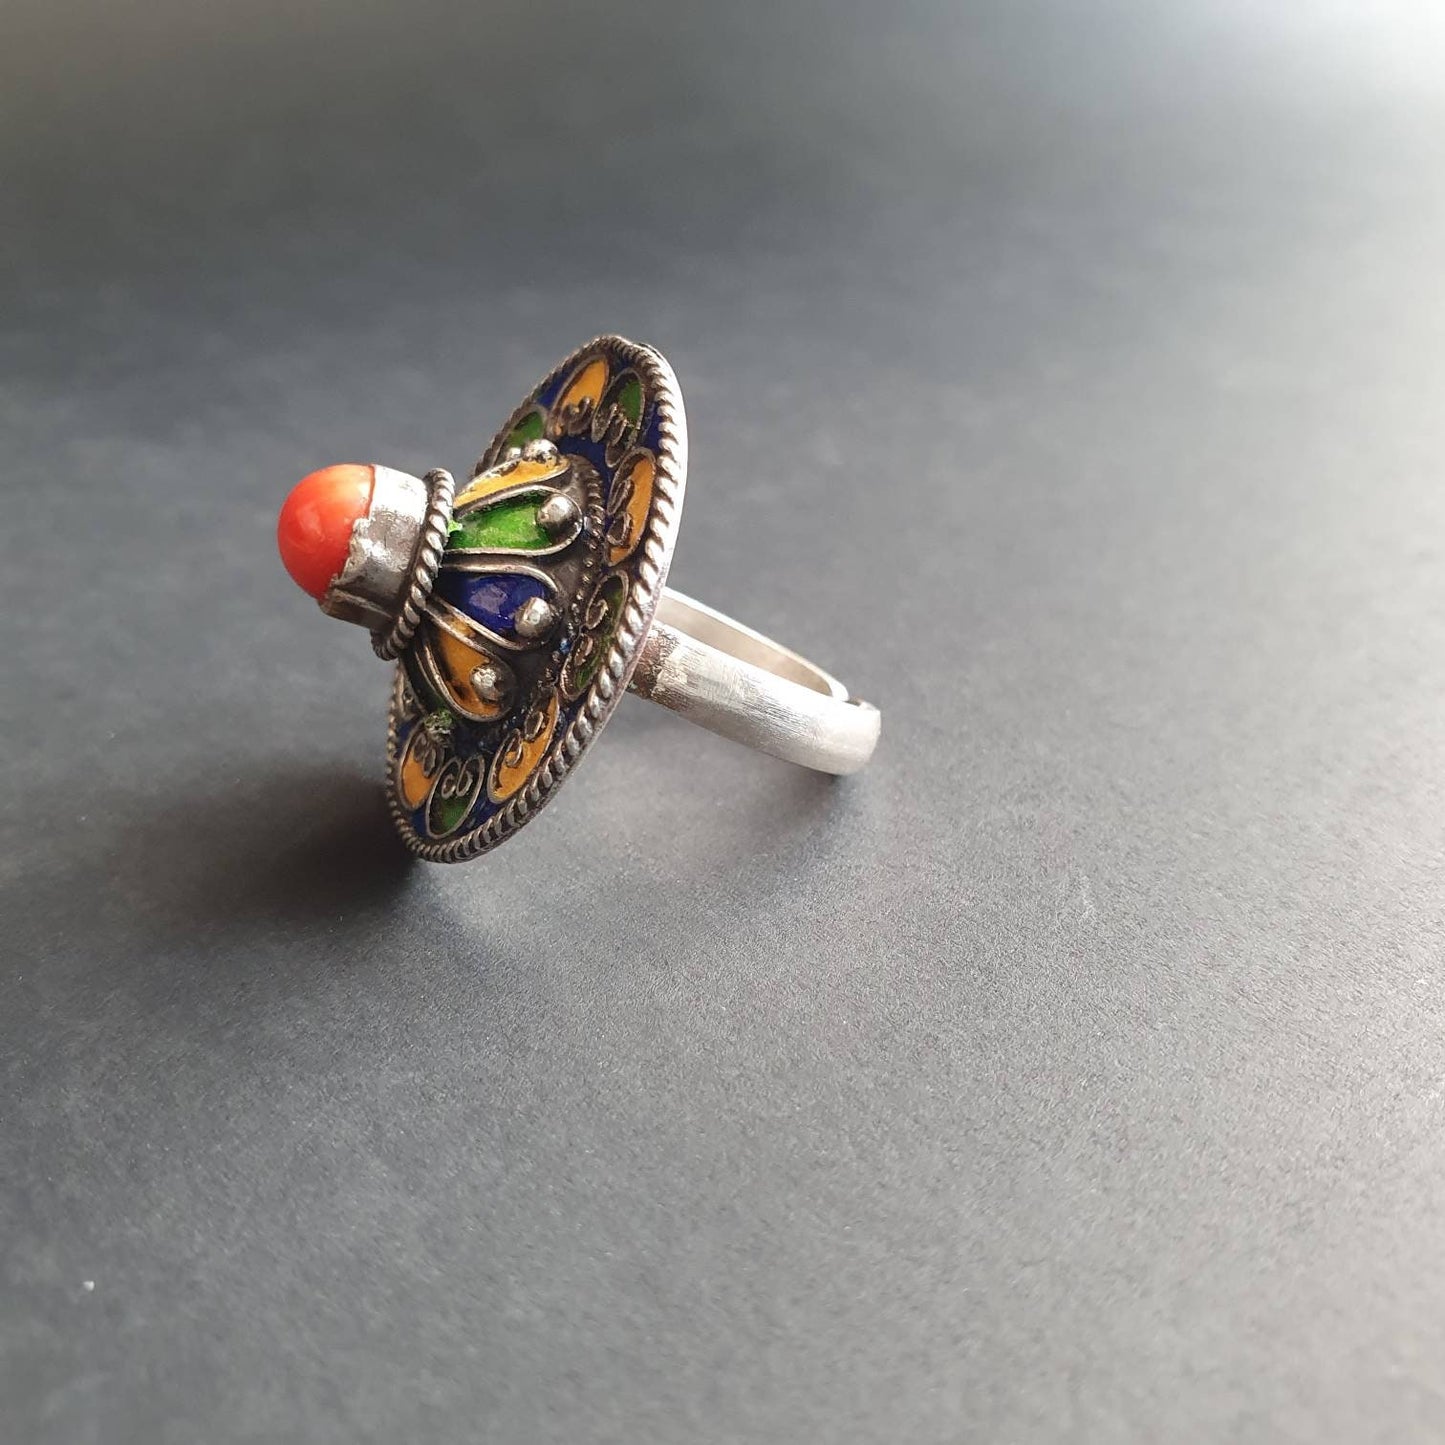 Ethnic ring, sterling silver ring, enamel ring,morrocan jewelry, tribal jewelry, silver ring, statement ring, gifts for all